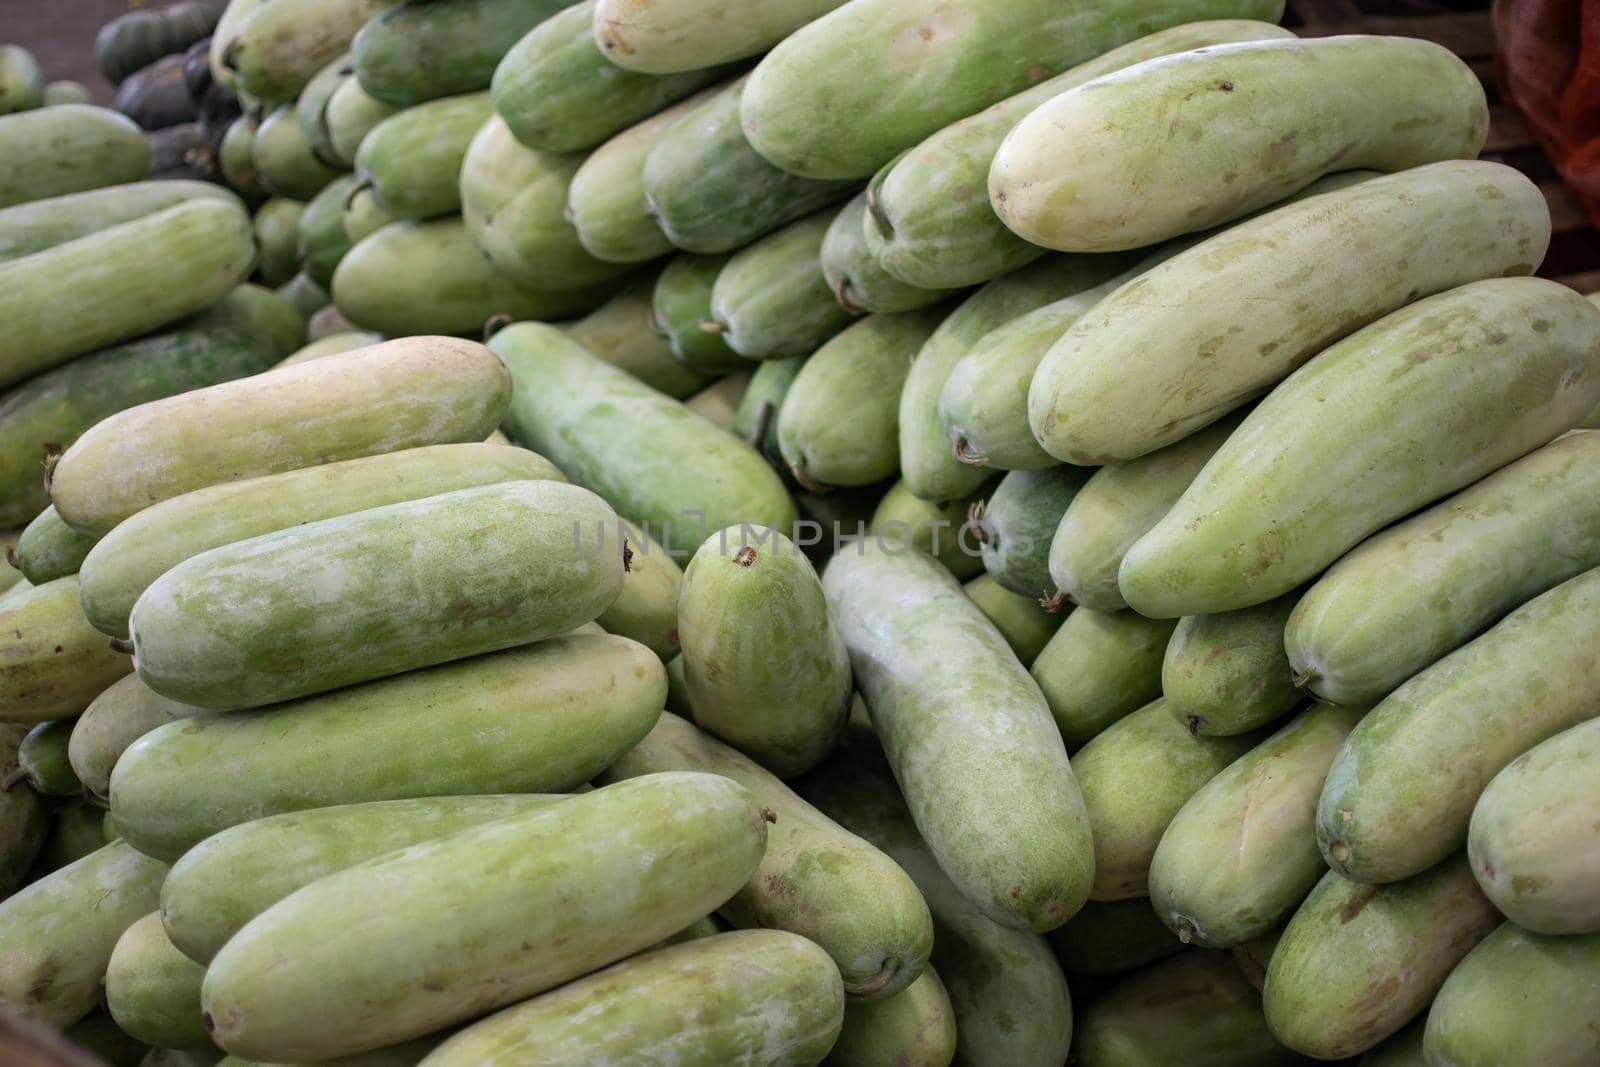 Fresh green tropical fruit, vegetables that looks like zucchini and squash at a local street market in Yangon, Myanmar